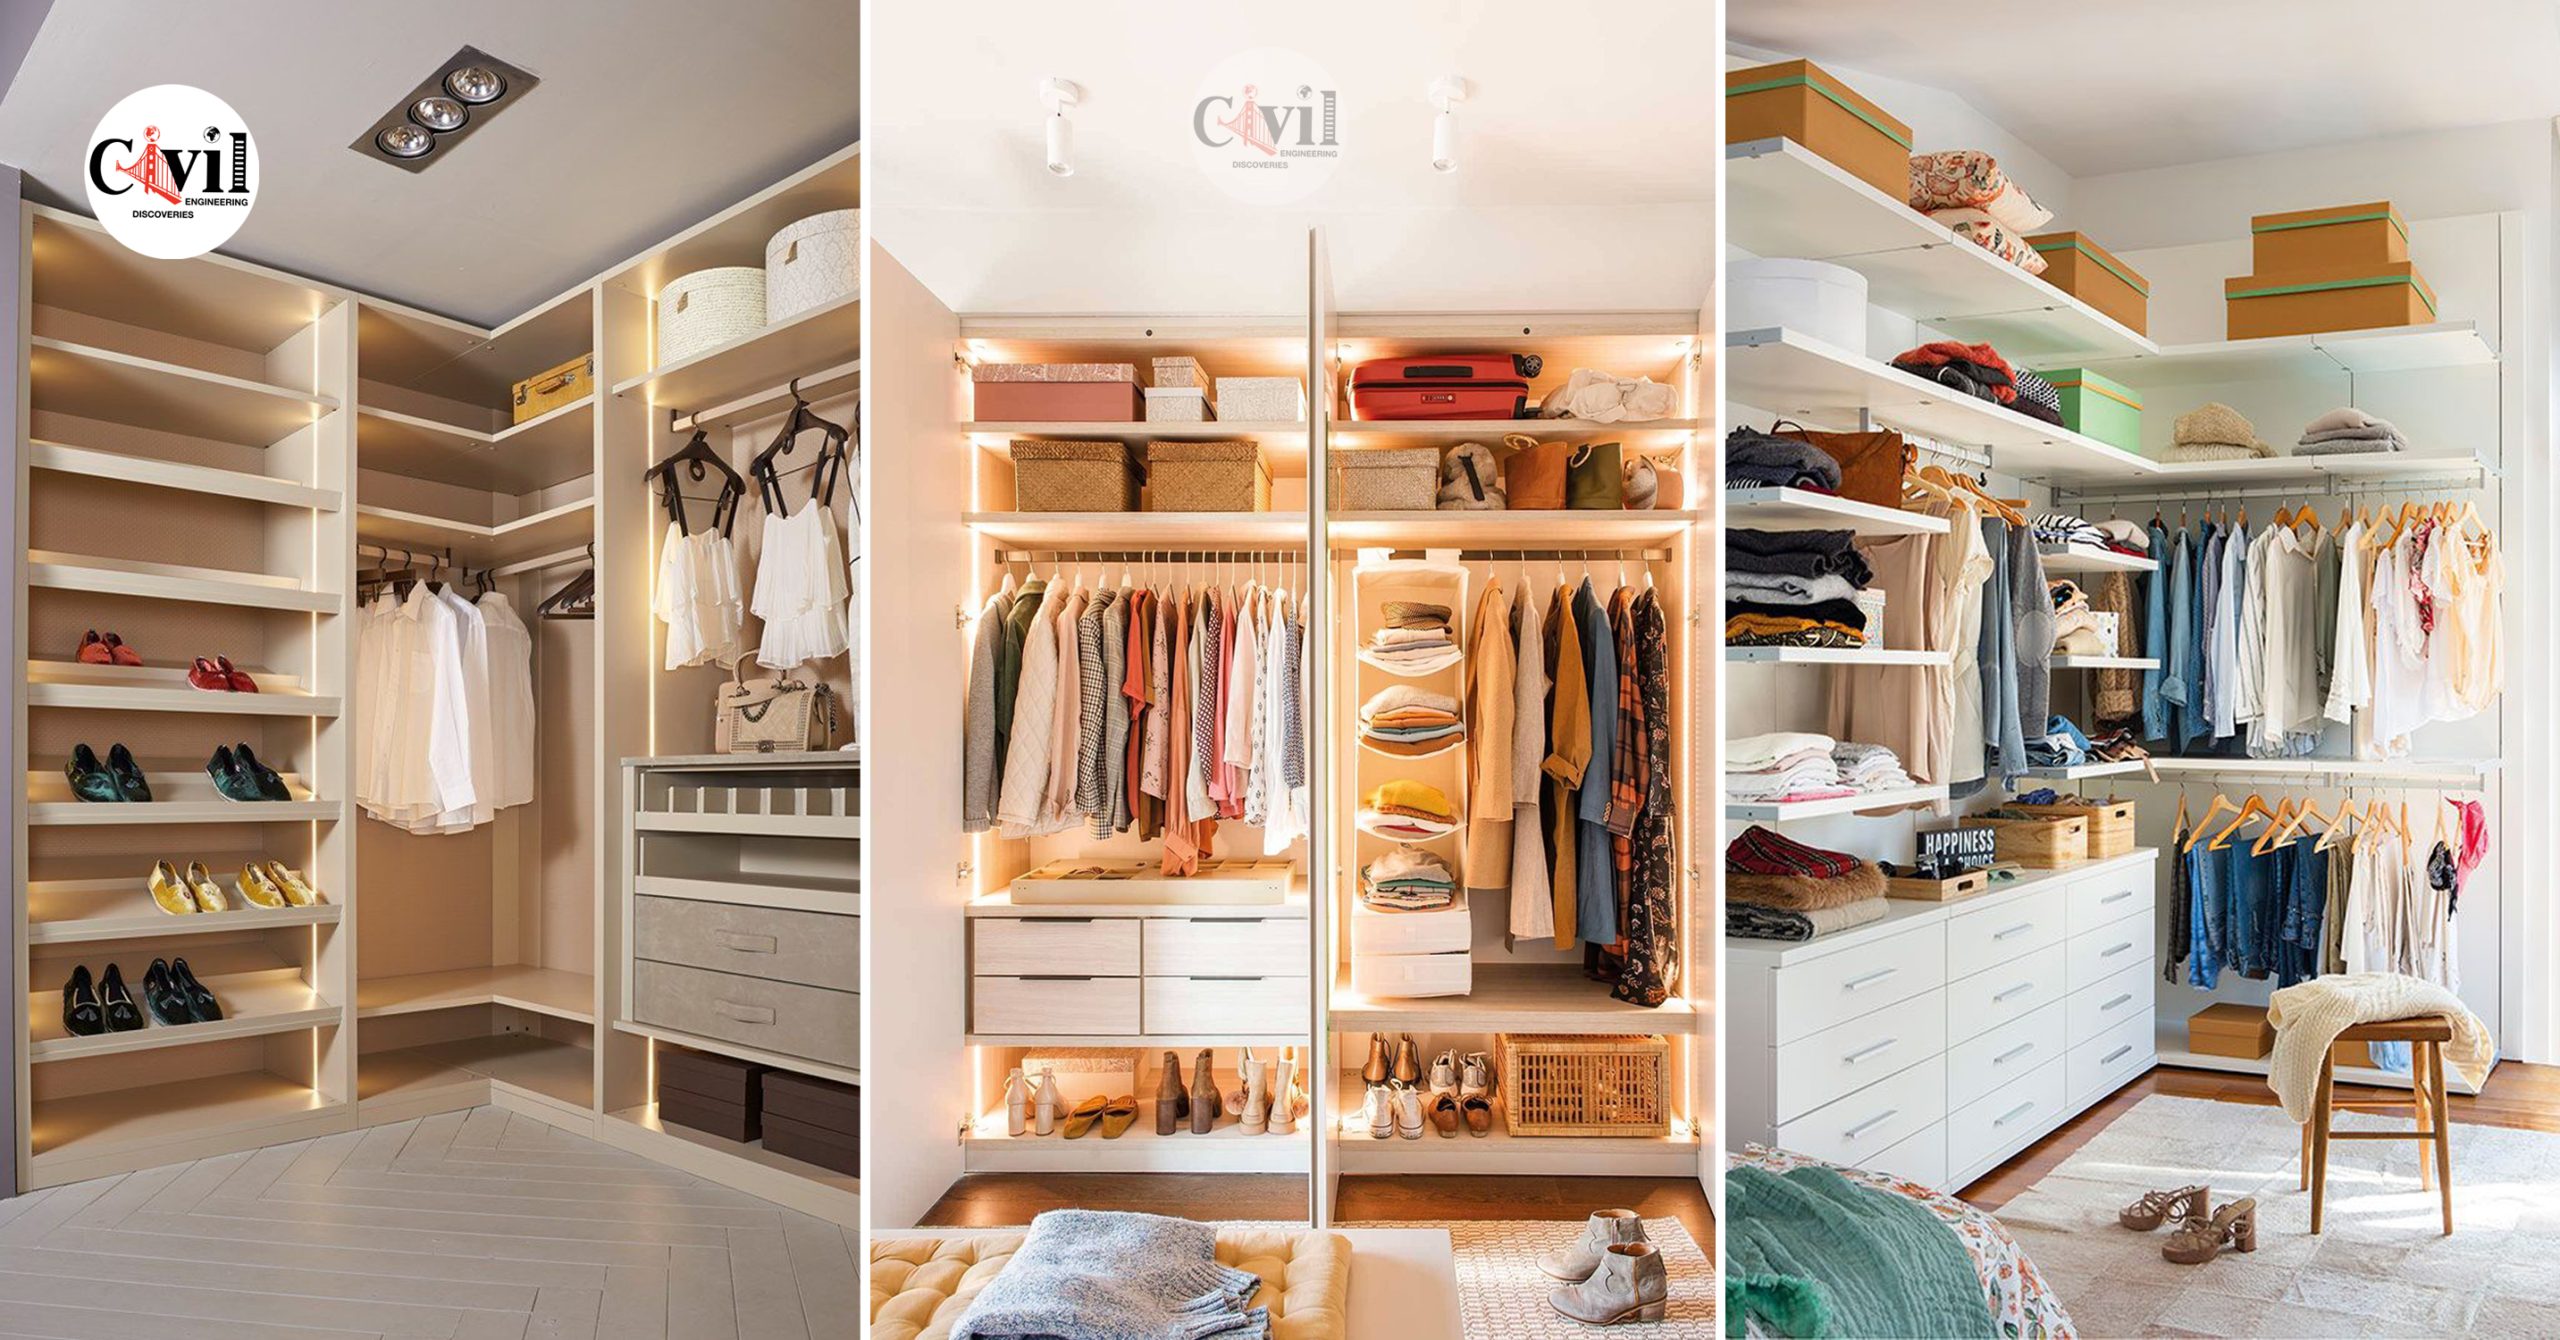 https://engineeringdiscoveries.com/wp-content/uploads/2022/02/New-Stylish-Closet-Design-Ideas-Youll-Love--scaled.jpg